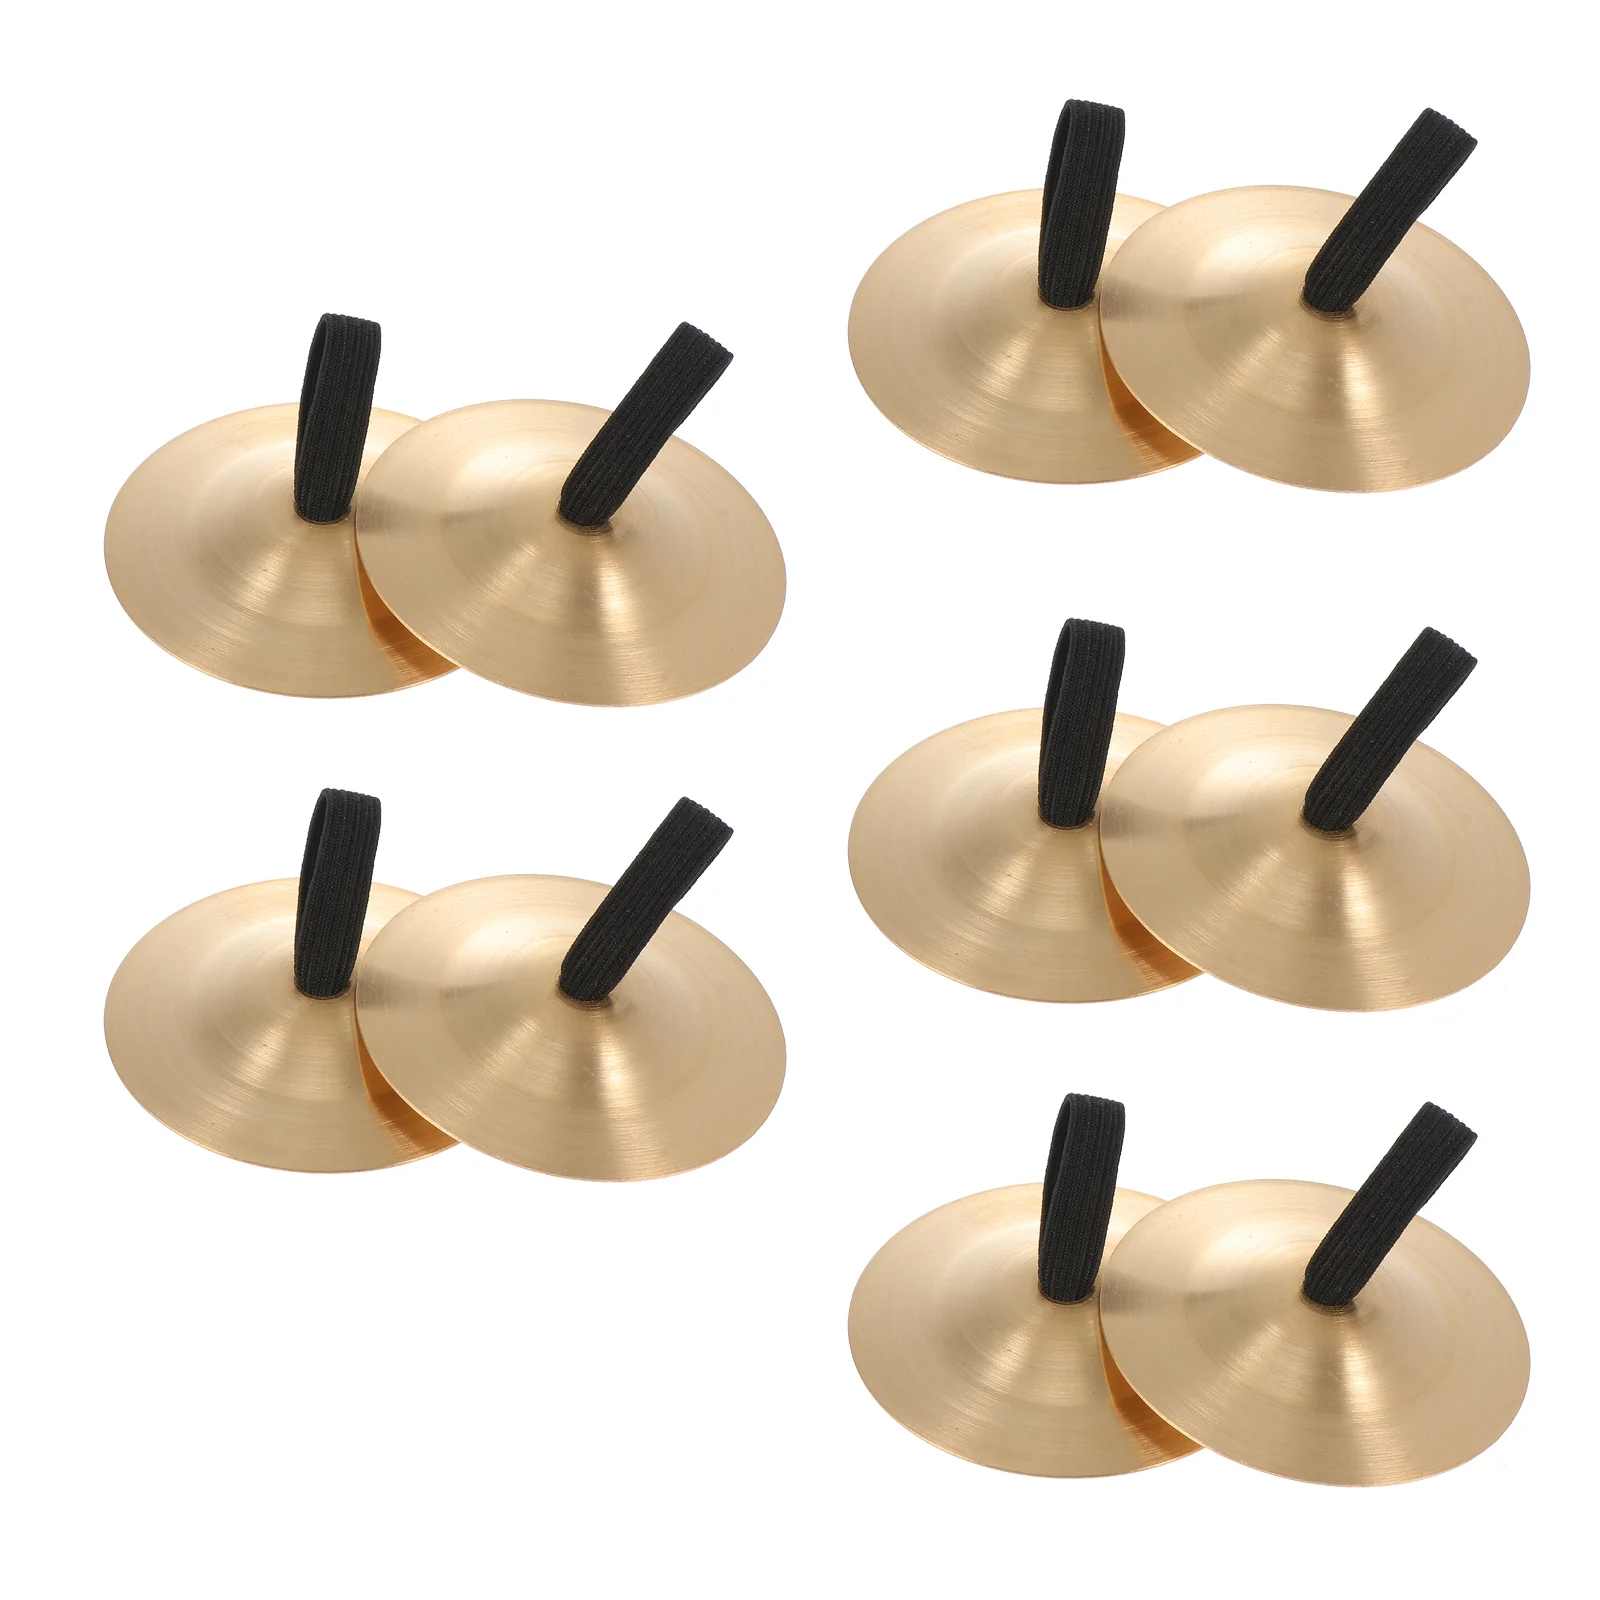 

Finger Cymbals Belly Dancing Musical Finger Instruments Copper Cymbals Inger Cymbal Percussion Cymbal Dancing Props Cymba